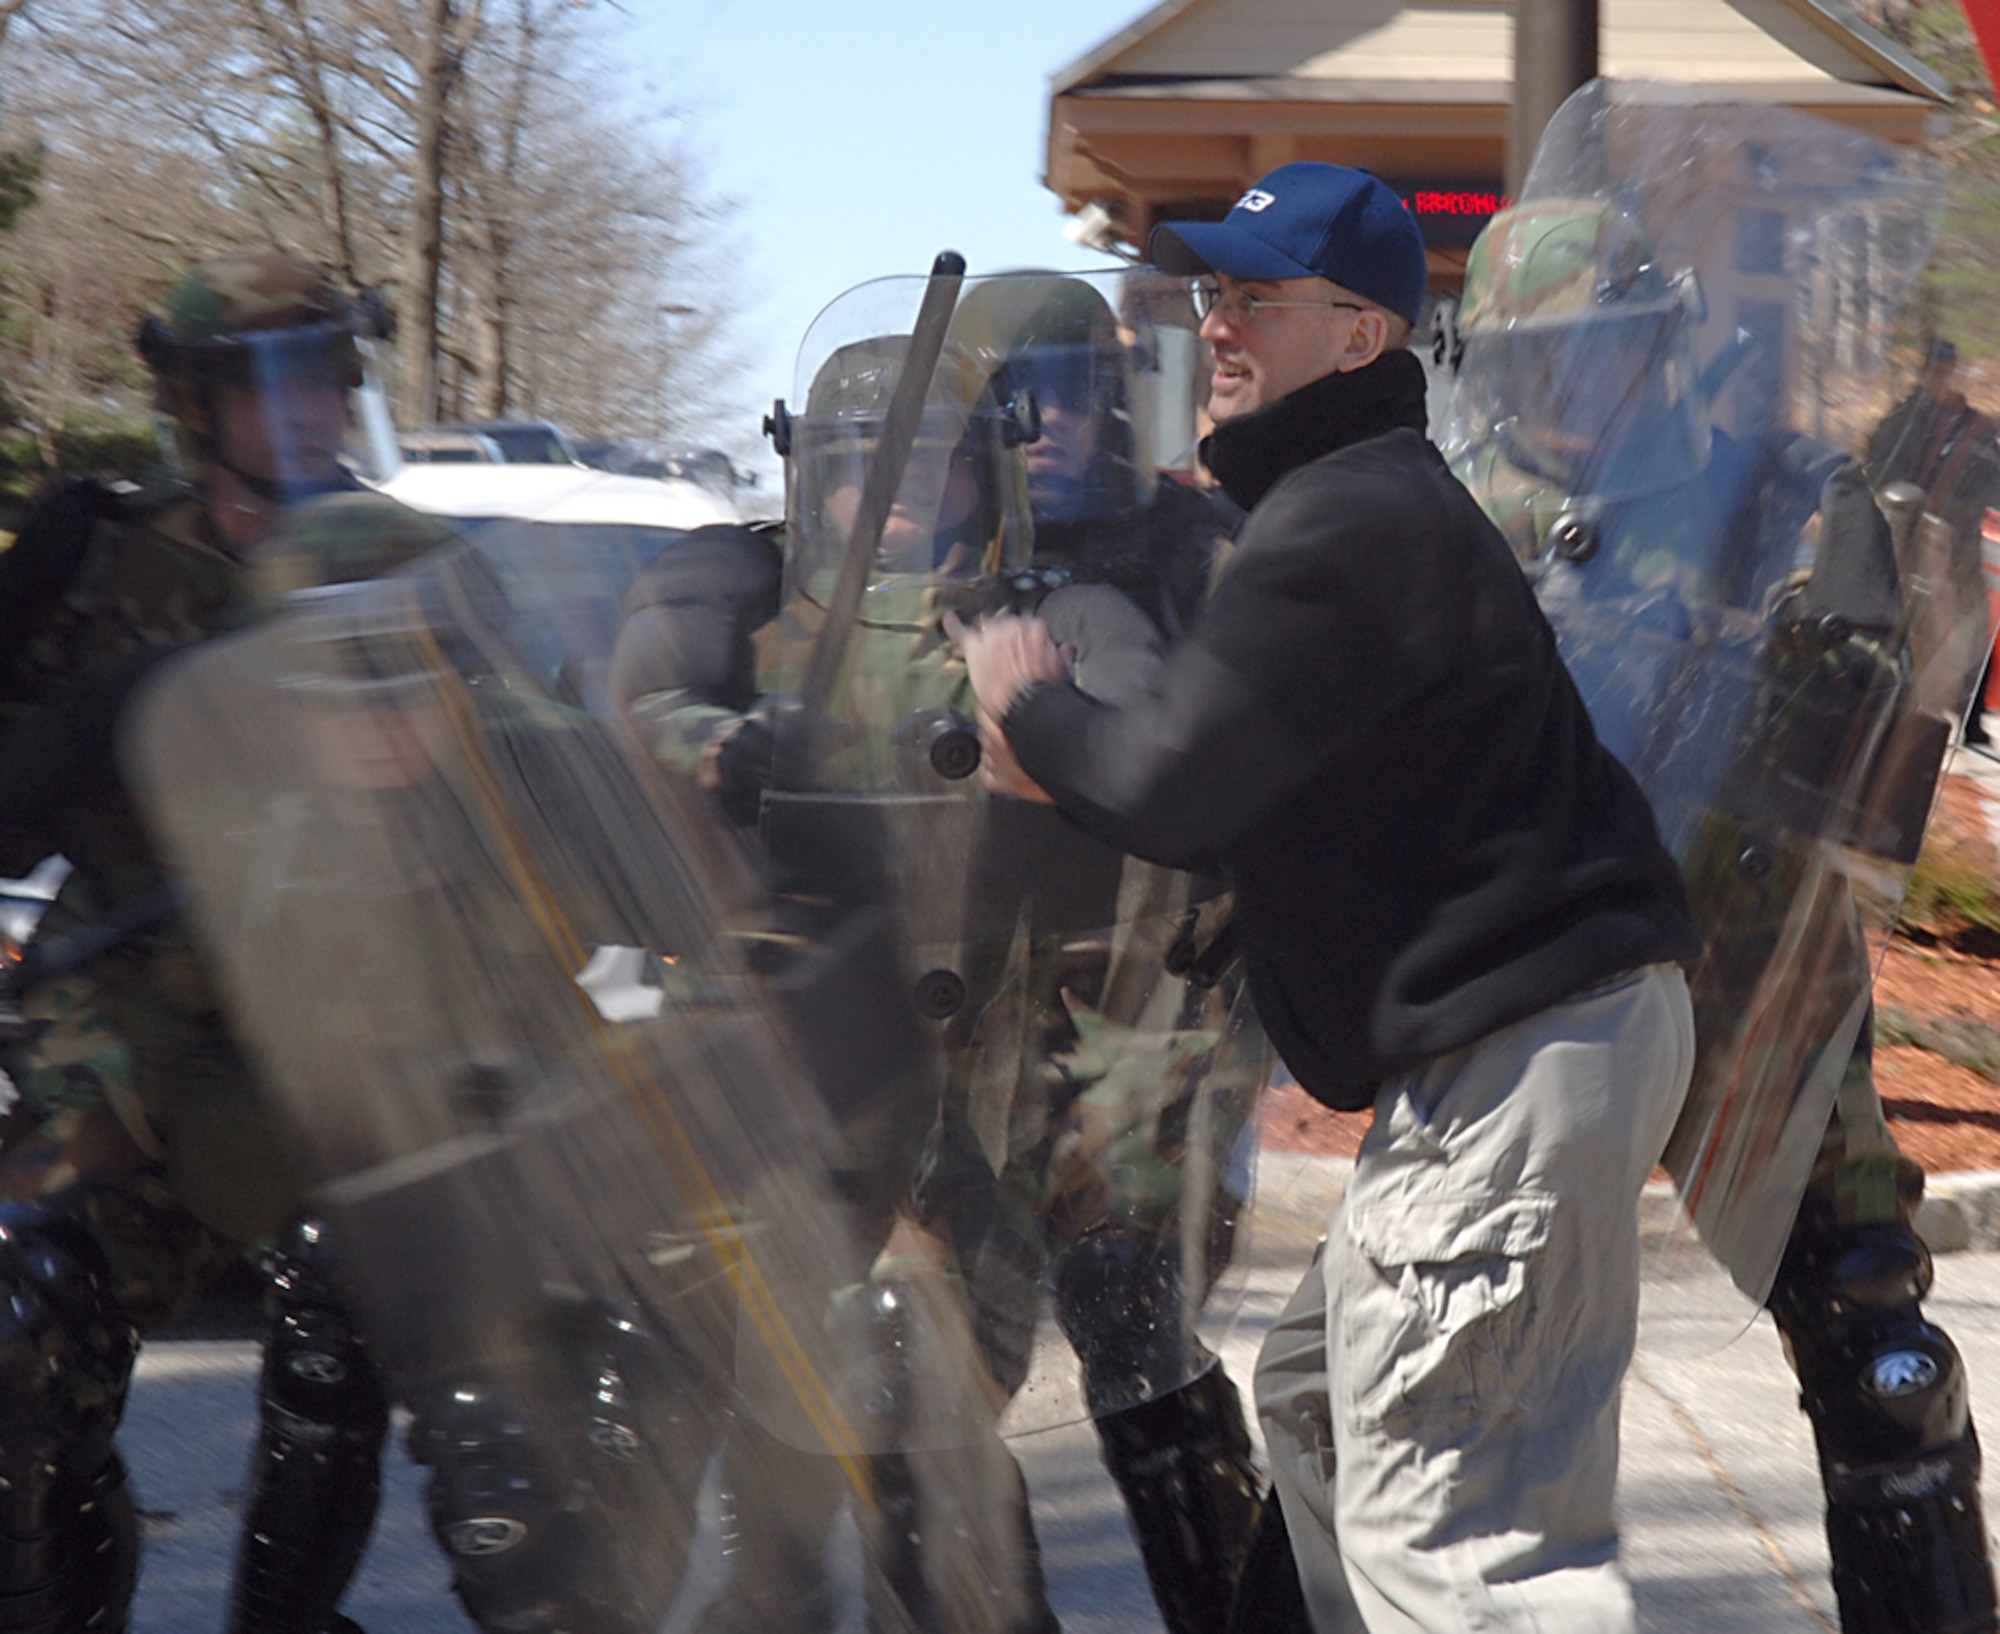 Tech. Sgt. Pete A. Surowiec, 66th Security Forces Squadron Individual Mobilization Augmentee, acts as a violent protester attempting to unlawfully enter Hanscom on April 20 during a squadron-level exercise. (US Air Force photo by Jan Abate)